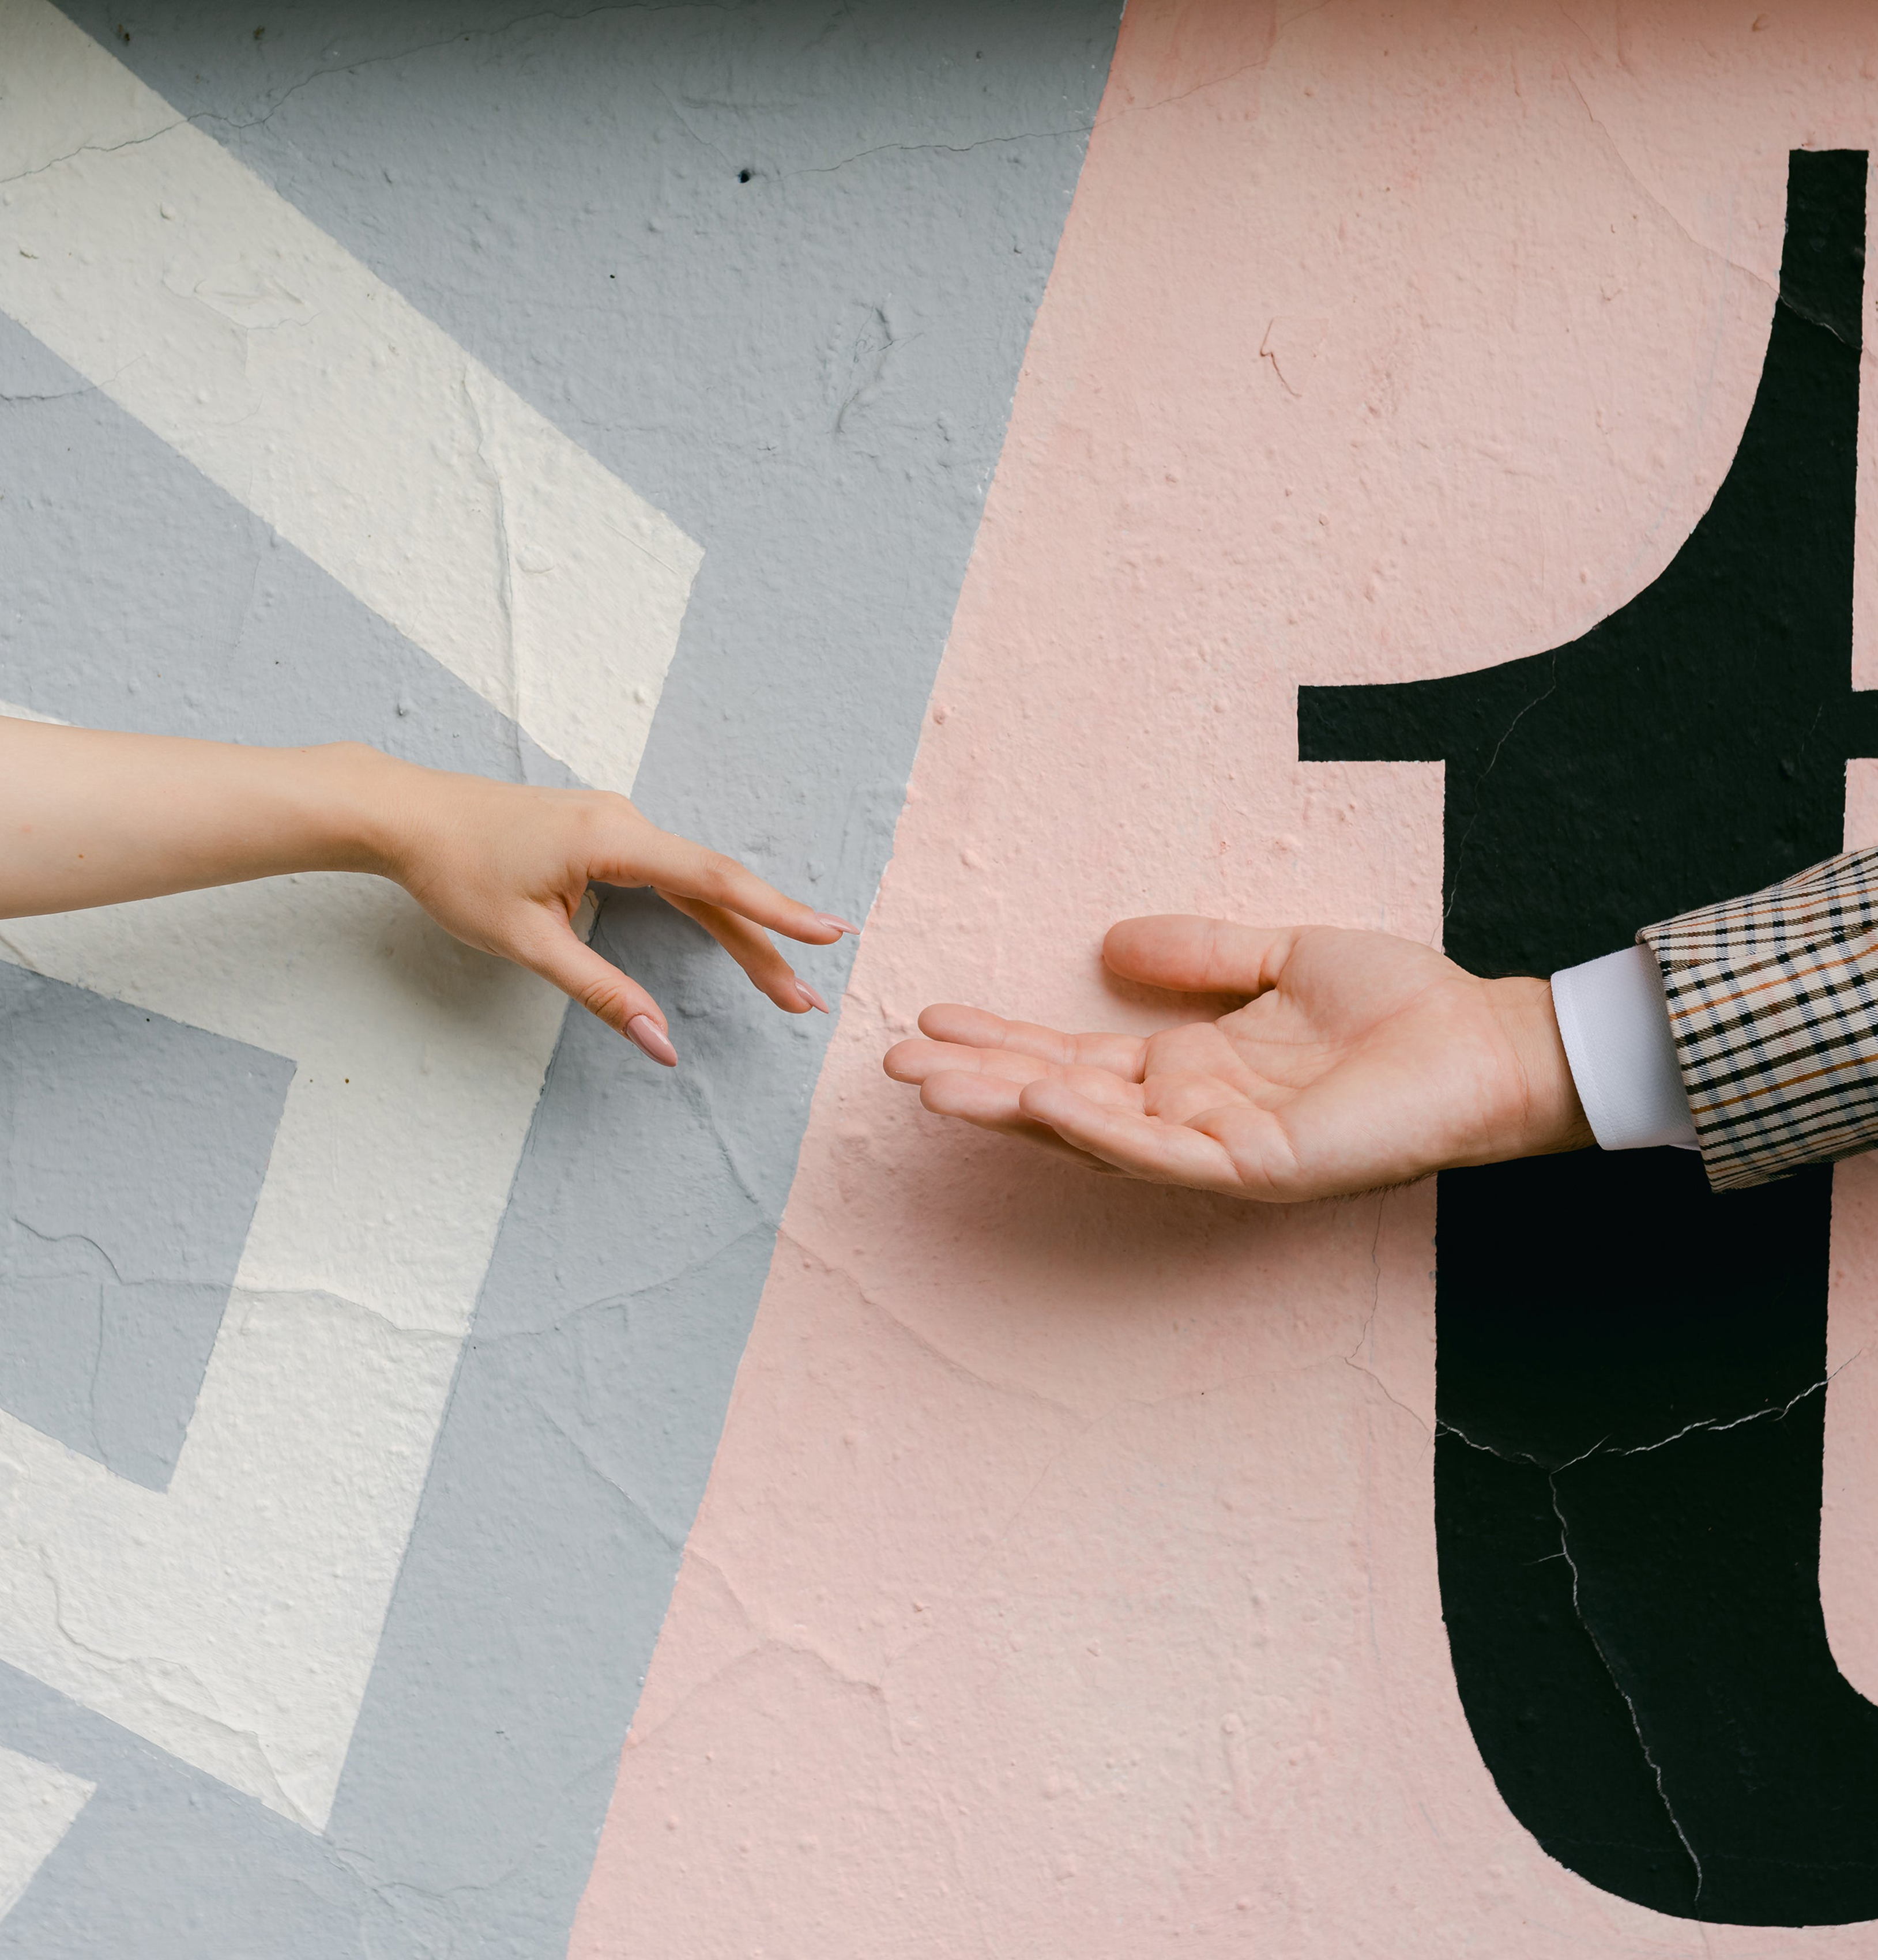 Two hands reach out for each other against a painted wall